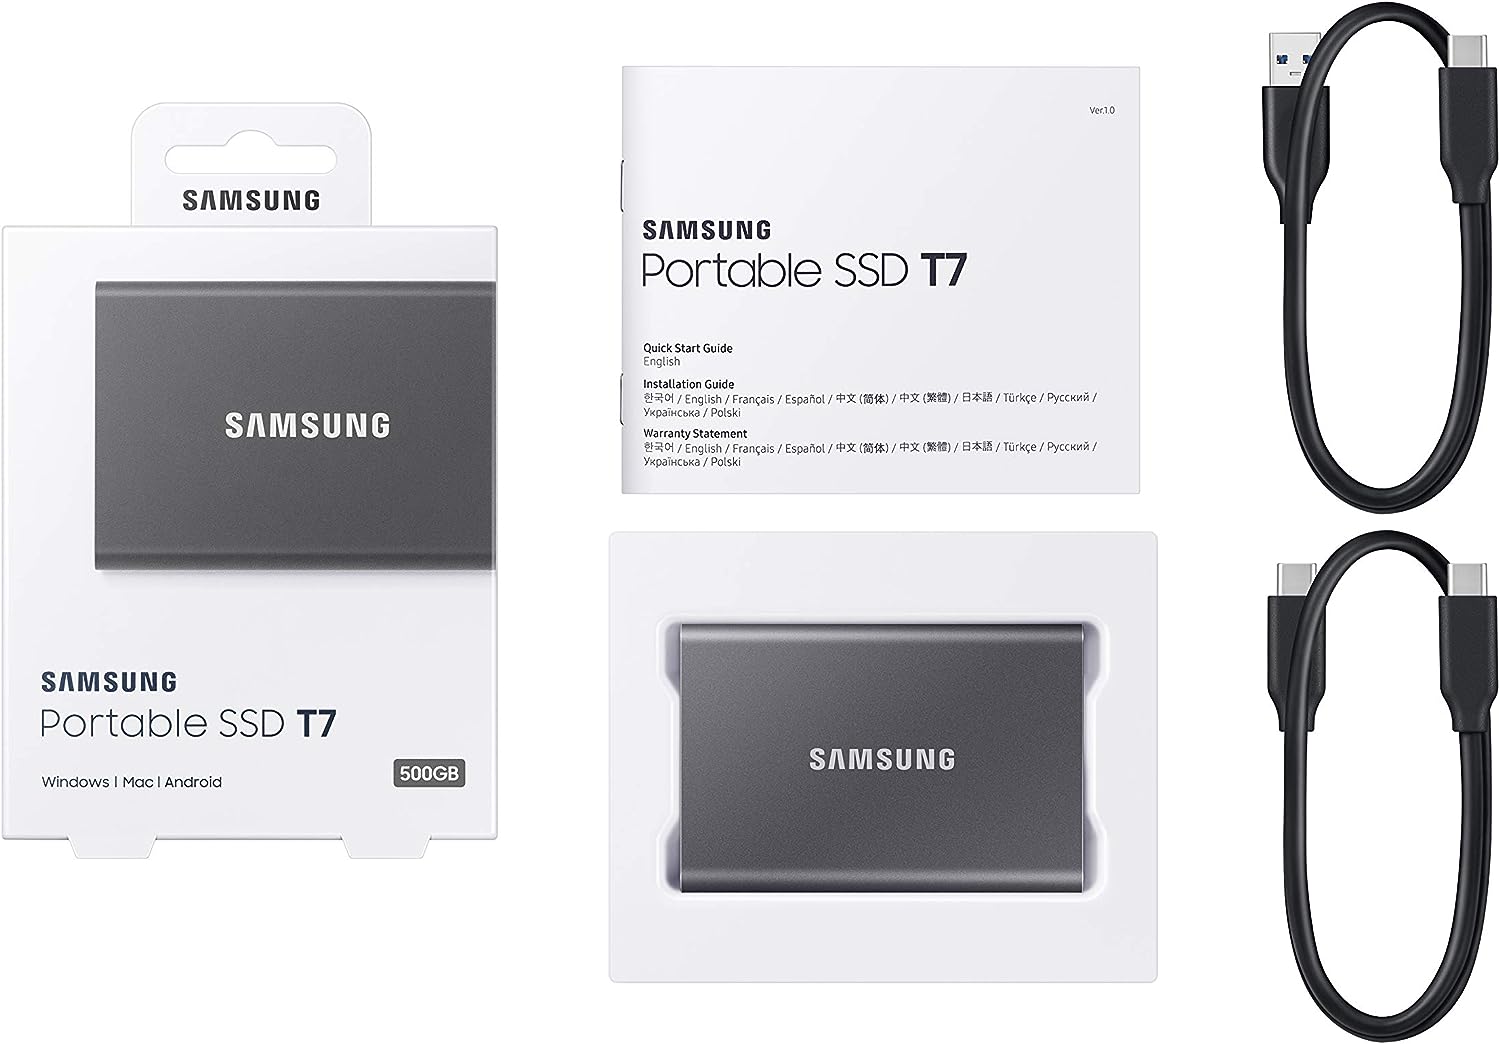 SAMSUNG SSD T7 Portable External Solid State Drive 1TB Review